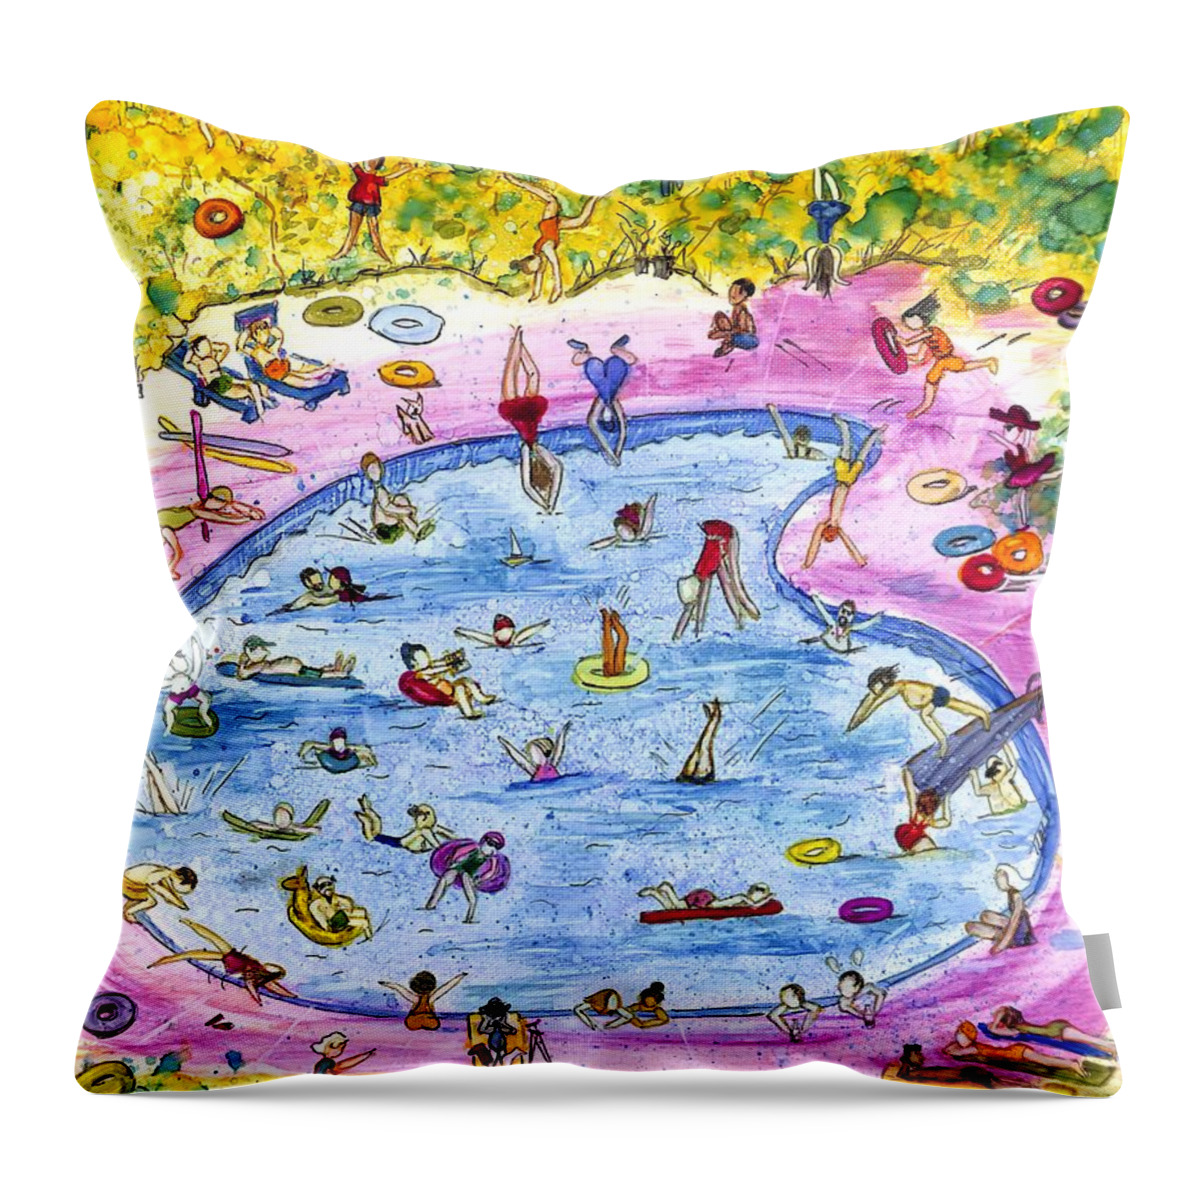 Swimming Pool Throw Pillow featuring the painting Pool Party by Patty Donoghue